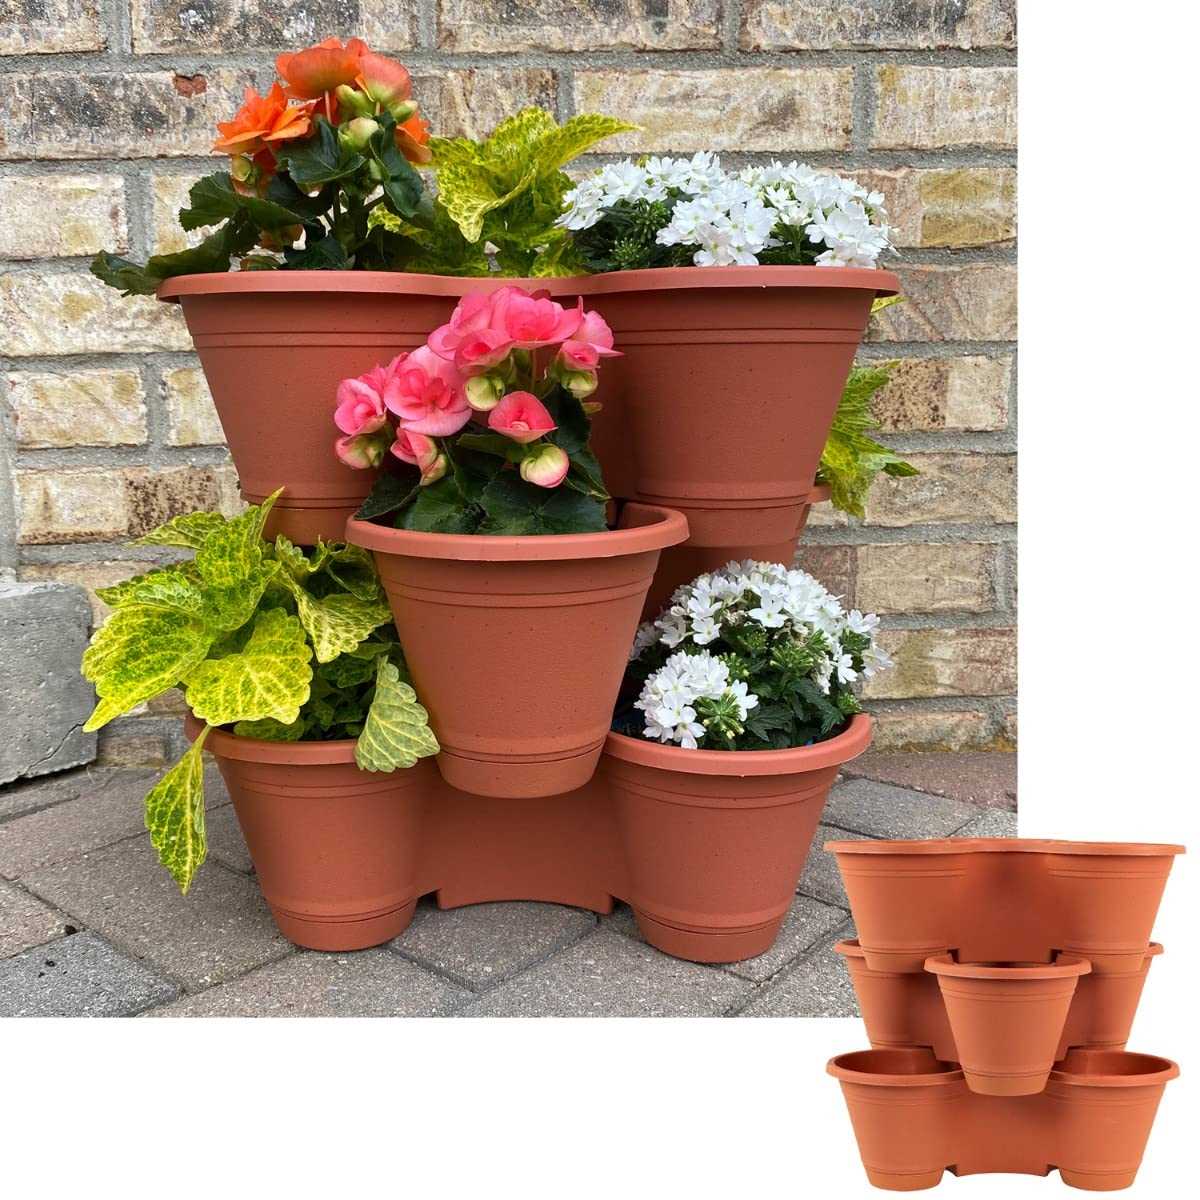 Discover the Beauty and Versatility of Plastic Planters - Your Guide to Choosing the Perfect Planters for Your Garden